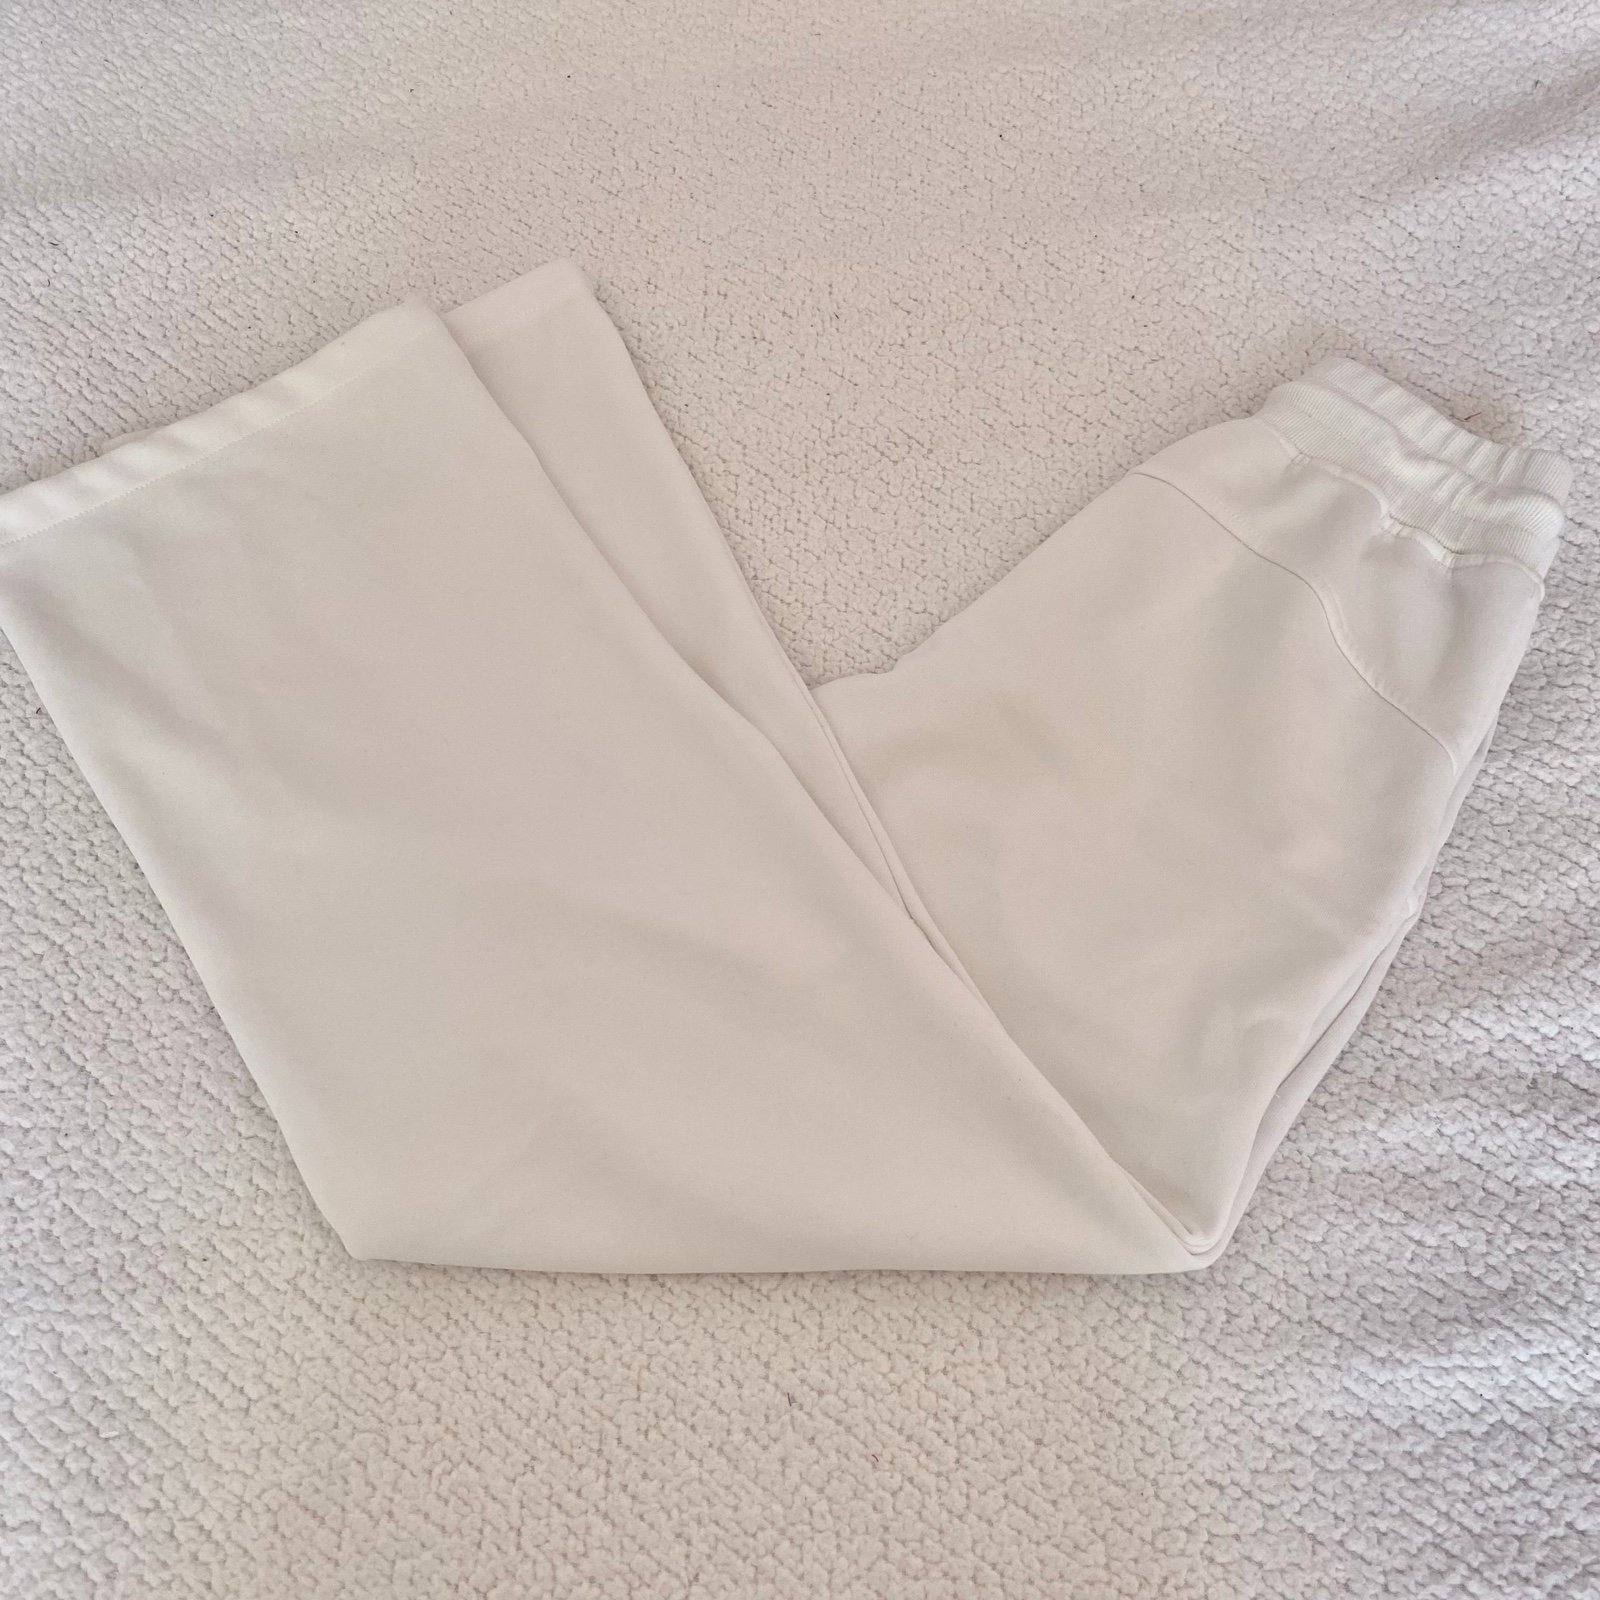 the Lowest price thick quality white sweatpants JhWBgqySj Hot Sale